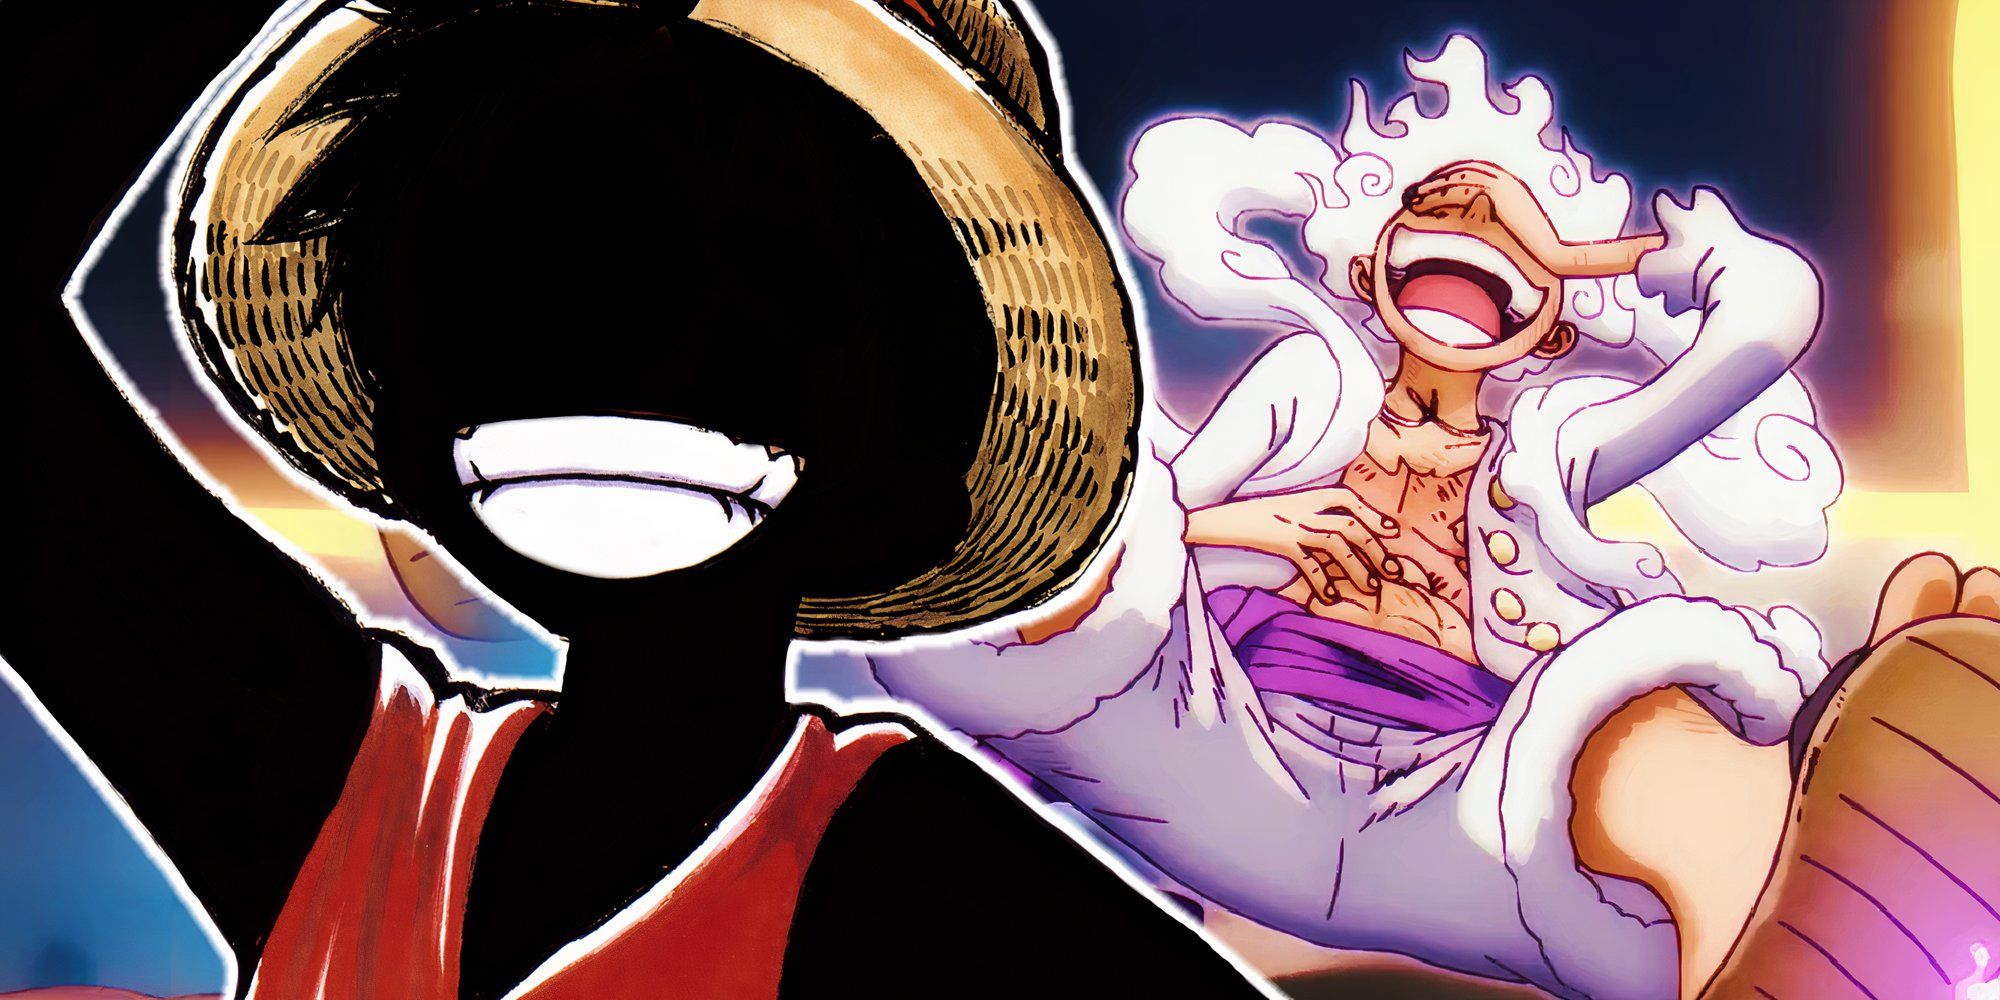 blacked out silhouette of luffy in a straw hat representing joyboy with luffy in gear 5 laughing in the background with a hand covering his eyes in one piece